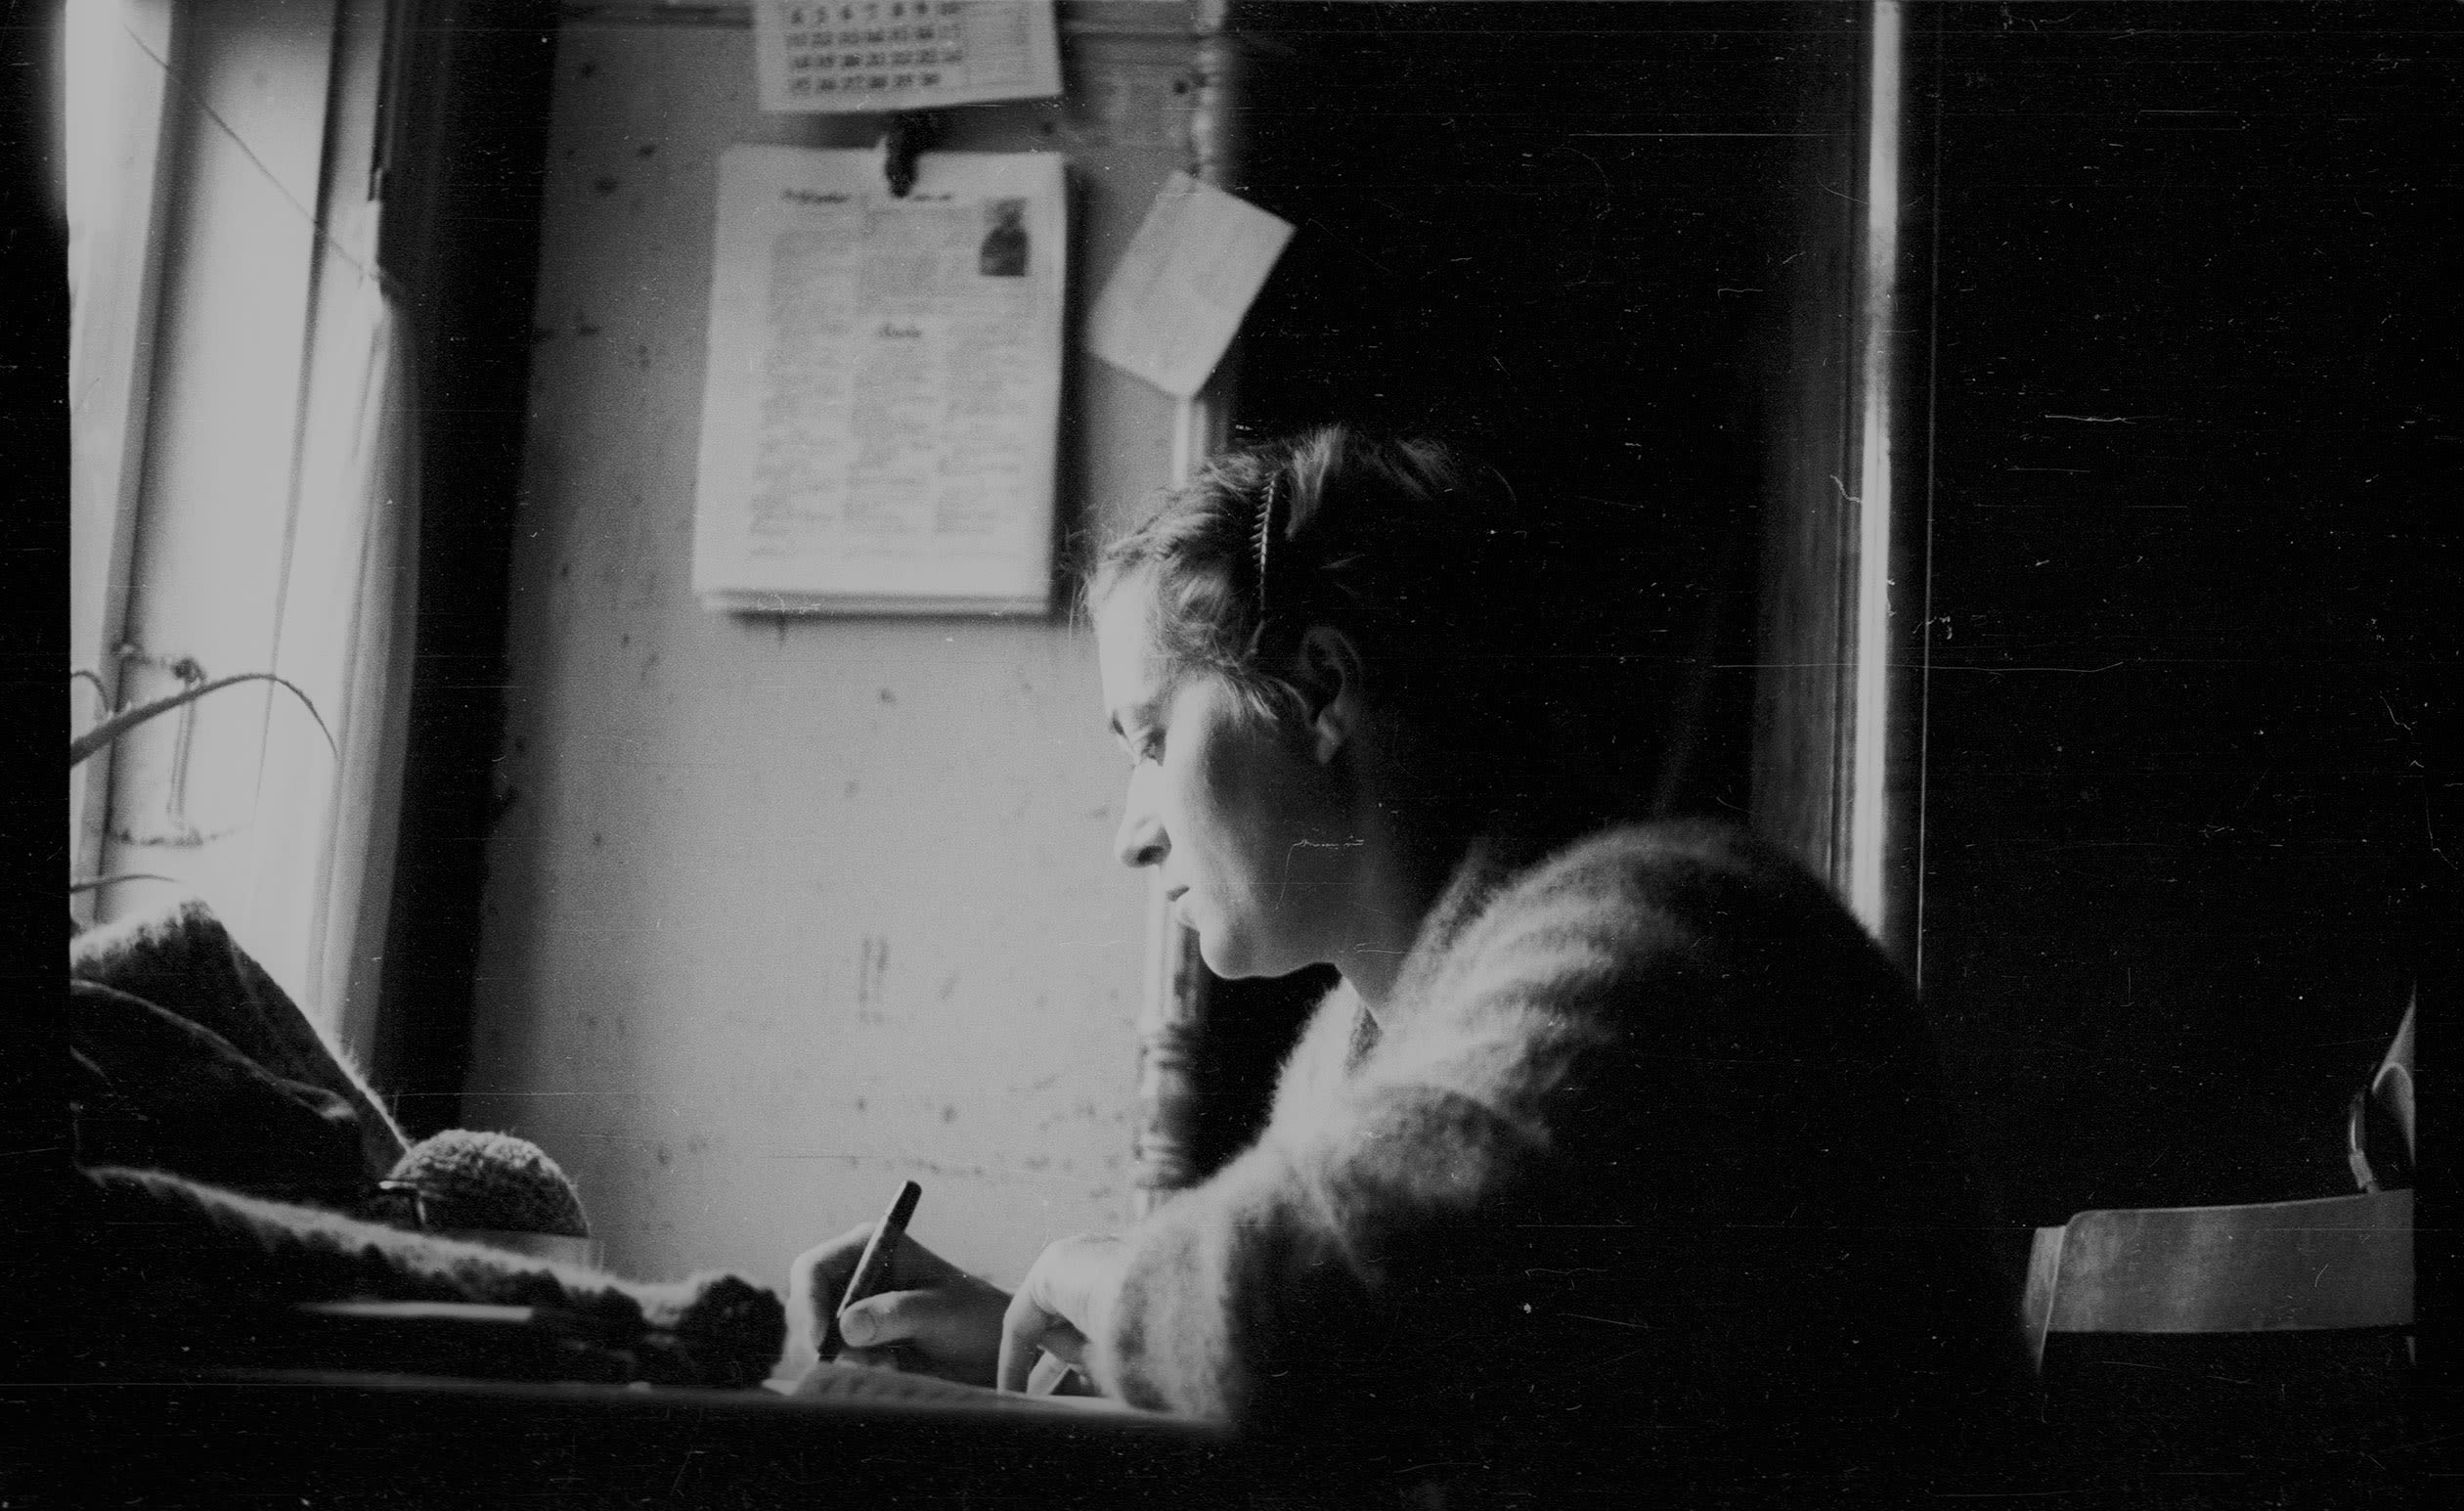 black and white photograph, a woman writing at a desk by a window.